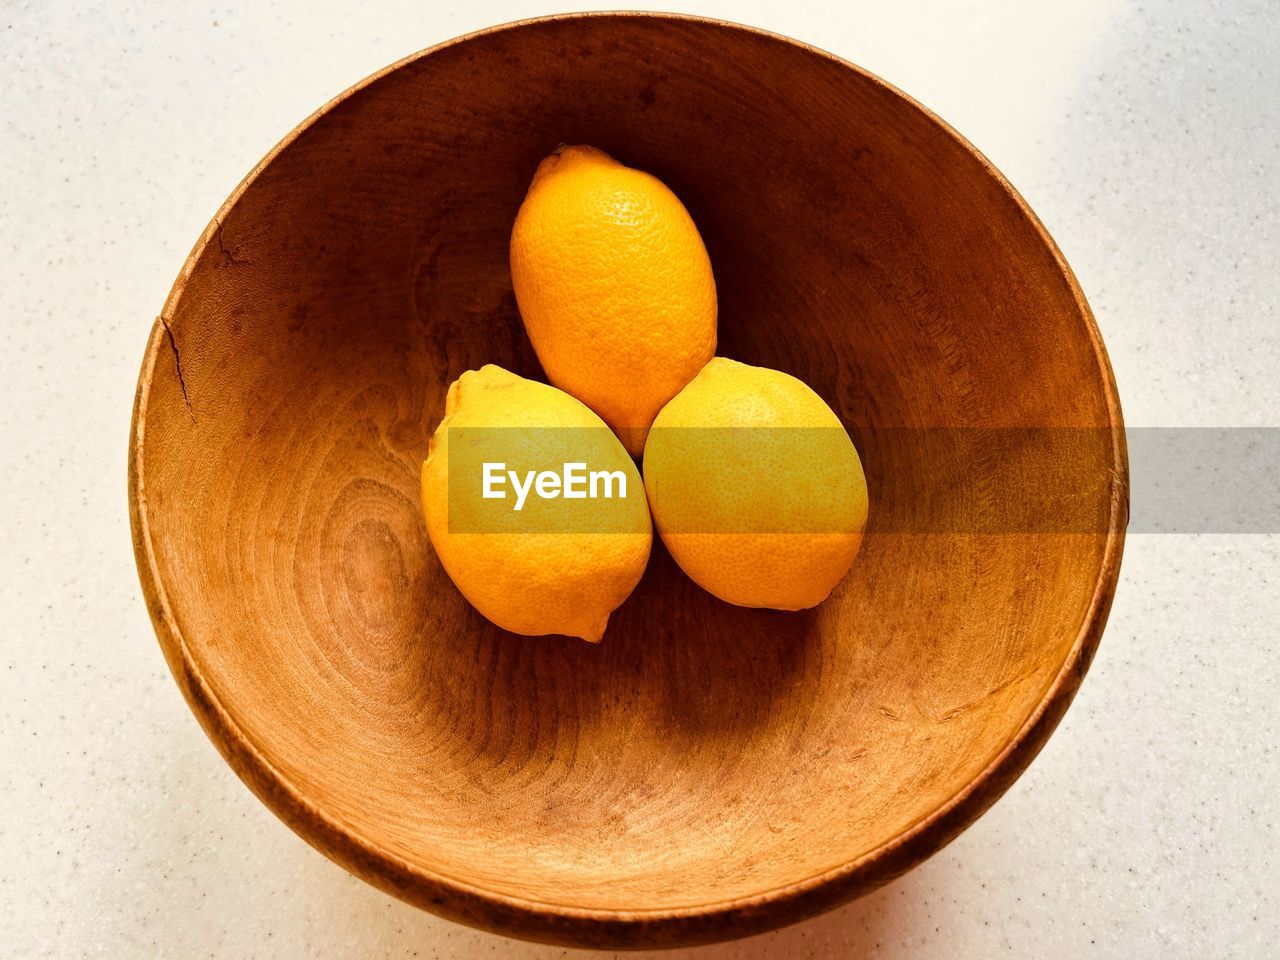 food, food and drink, healthy eating, freshness, wellbeing, produce, fruit, indoors, no people, still life, plant, citrus fruit, citrus, wood, directly above, bowl, studio shot, orange, table, orange color, close-up, high angle view, yellow